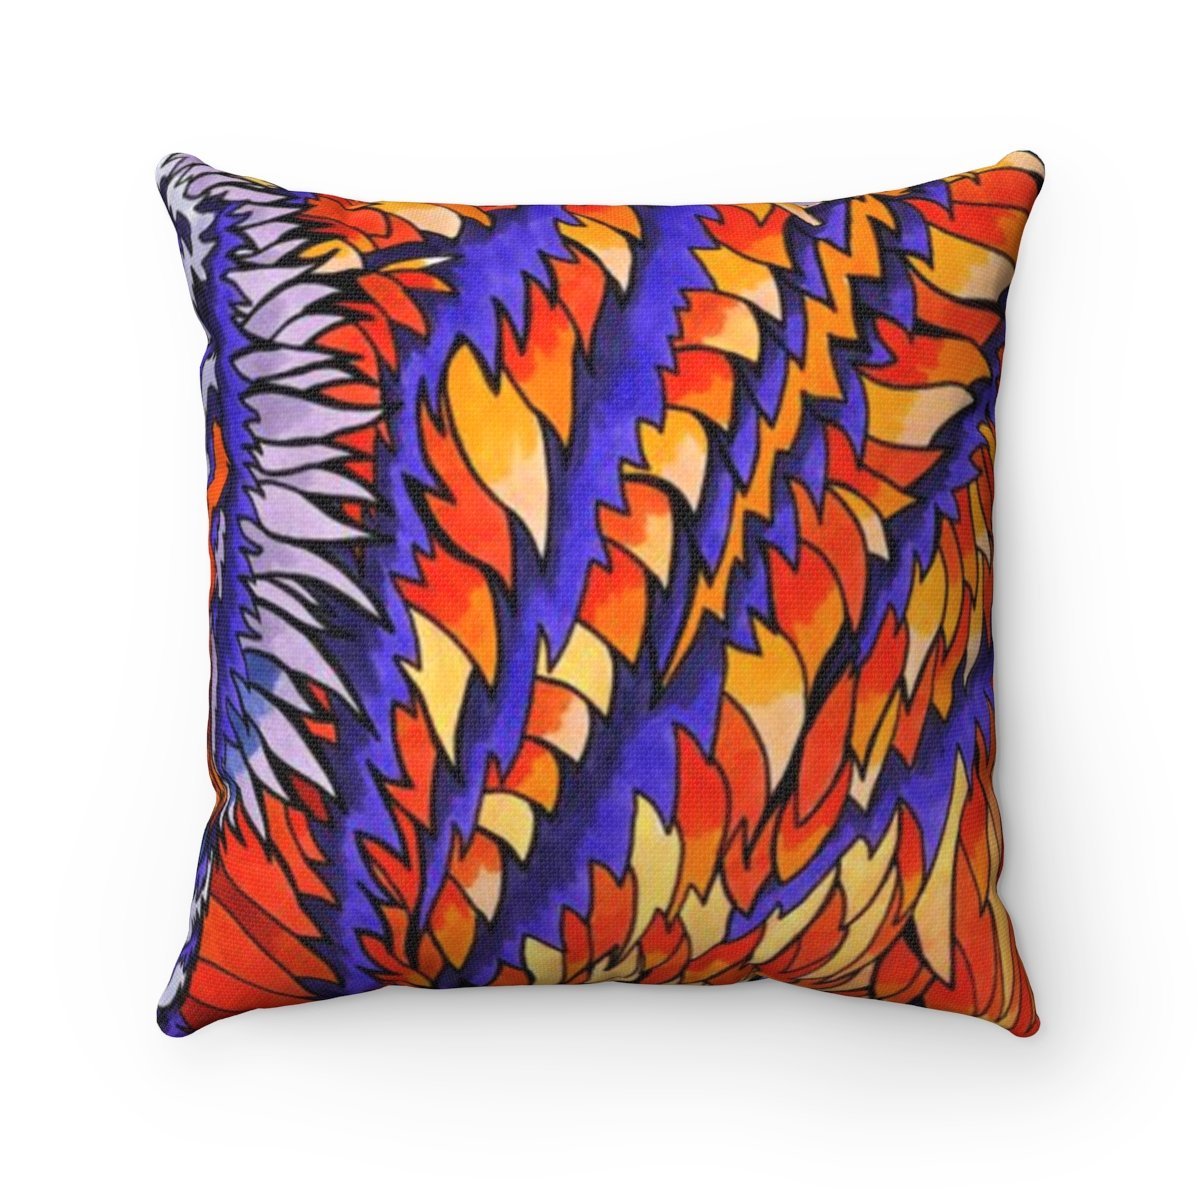 Home Decor Telenergetic Tiger Square Pillow Case - iEDM